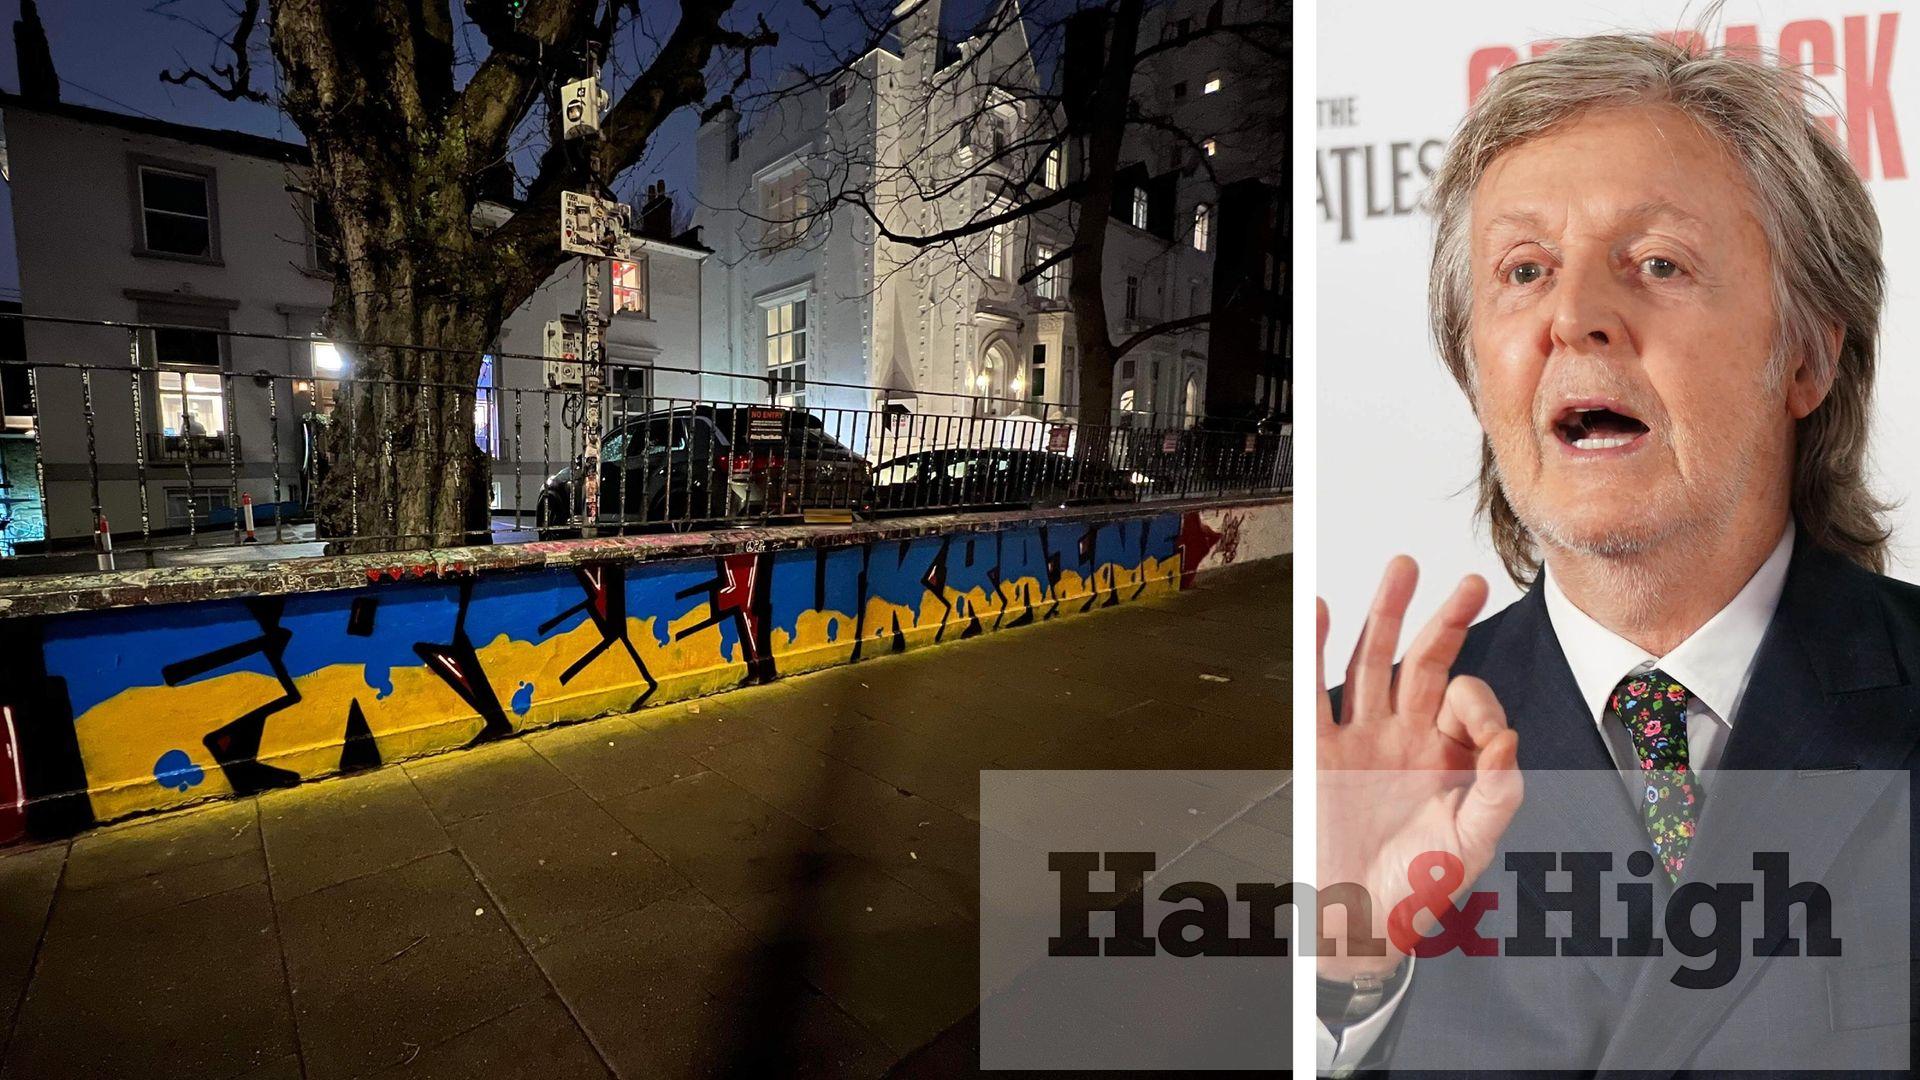 Abbey Road and The Beatles’ Paul McCartney support Ukraine | Hampstead Highgate Express